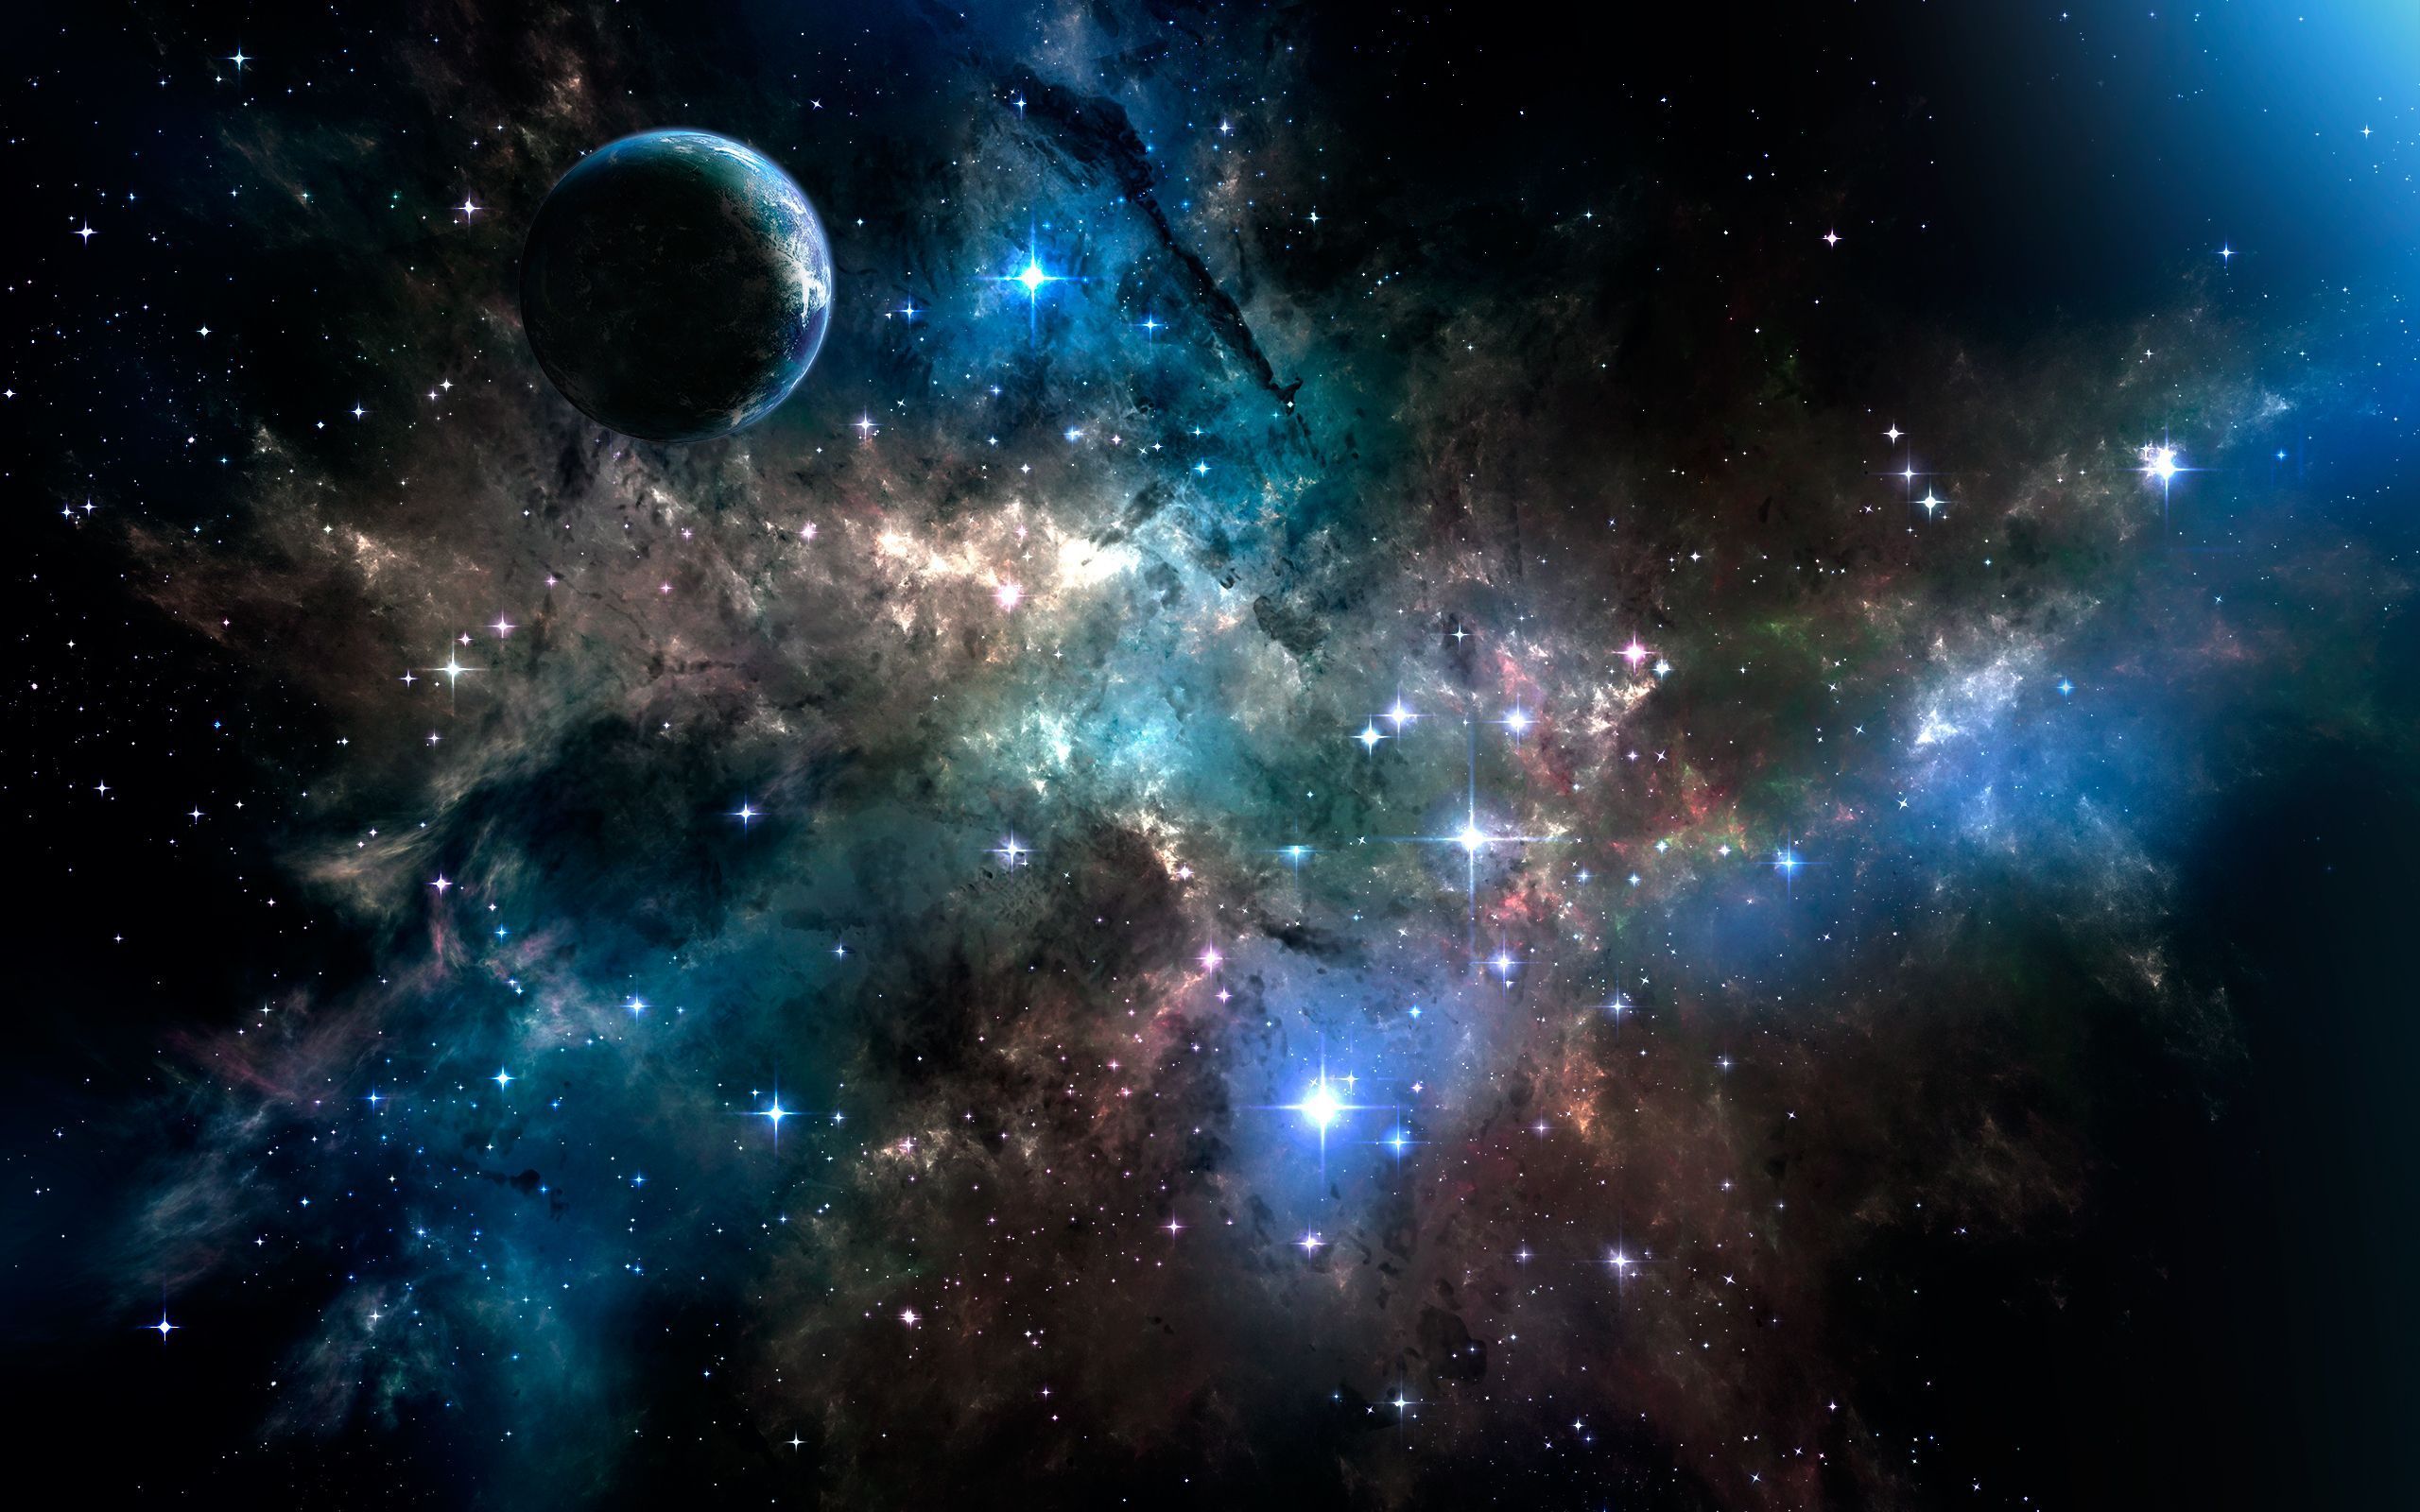 Wallpapers Nebulae in space Planets Stars Space Image #311540 Download